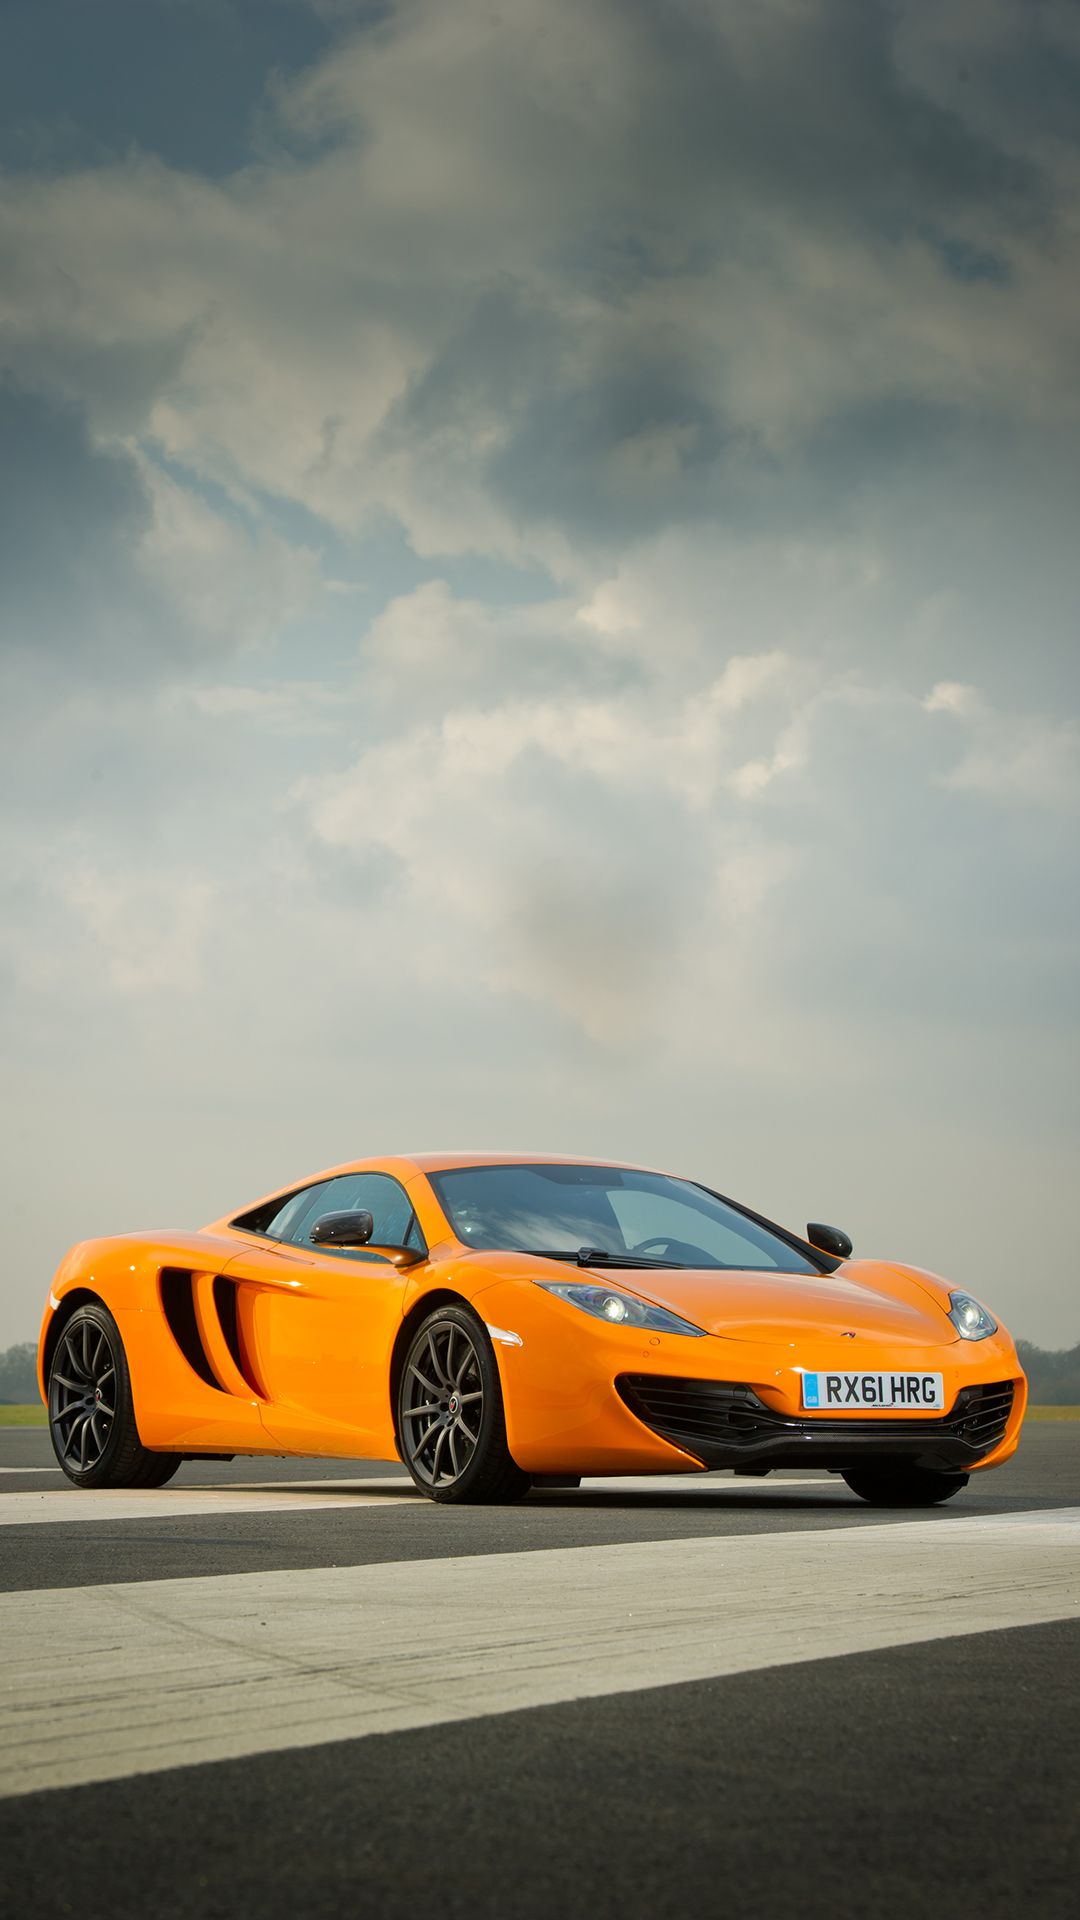 McLarenK wallpaper, free and easy to download